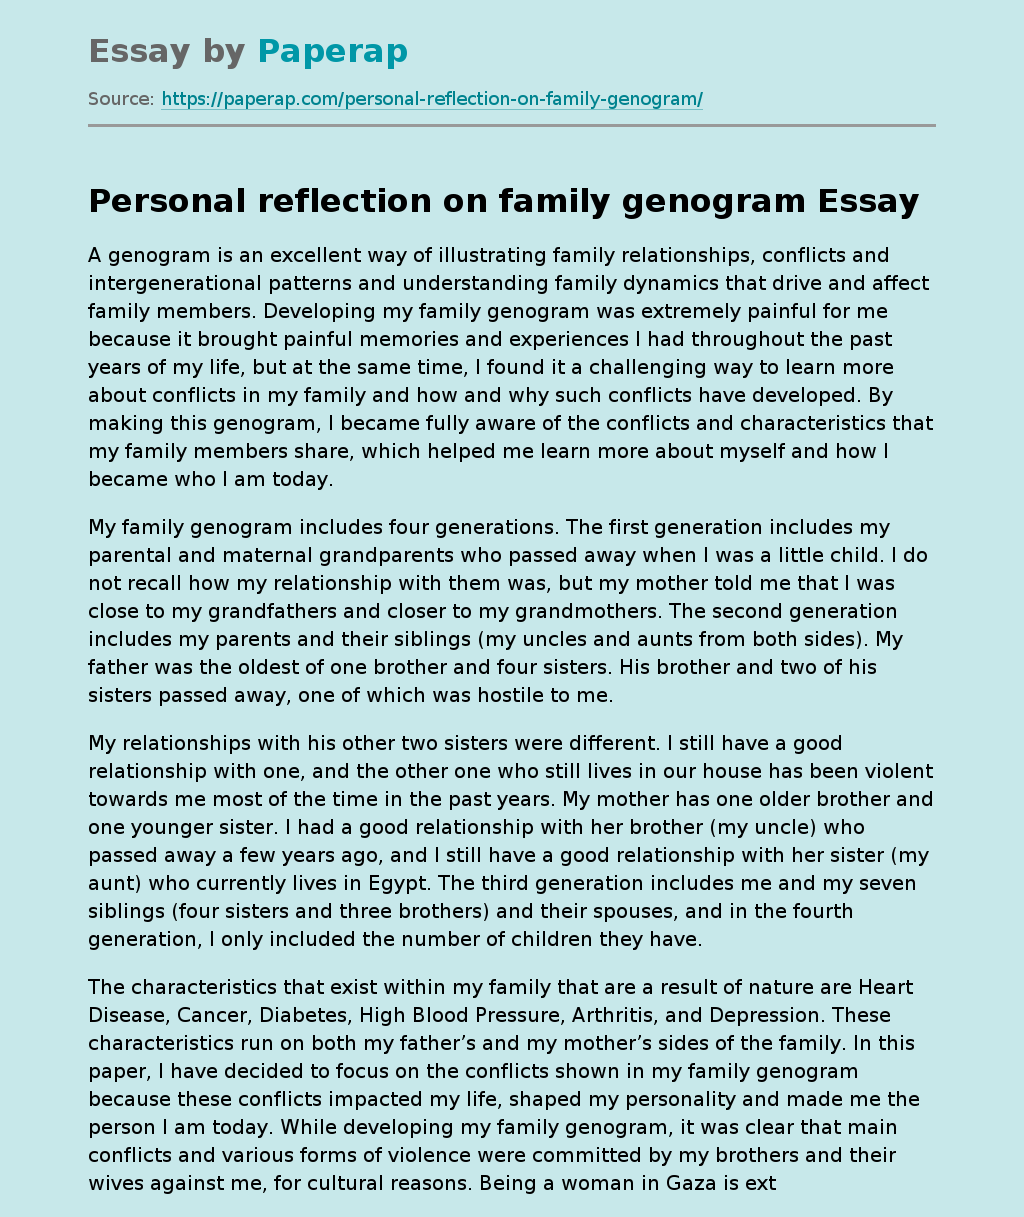 Personal reflection on family genogram